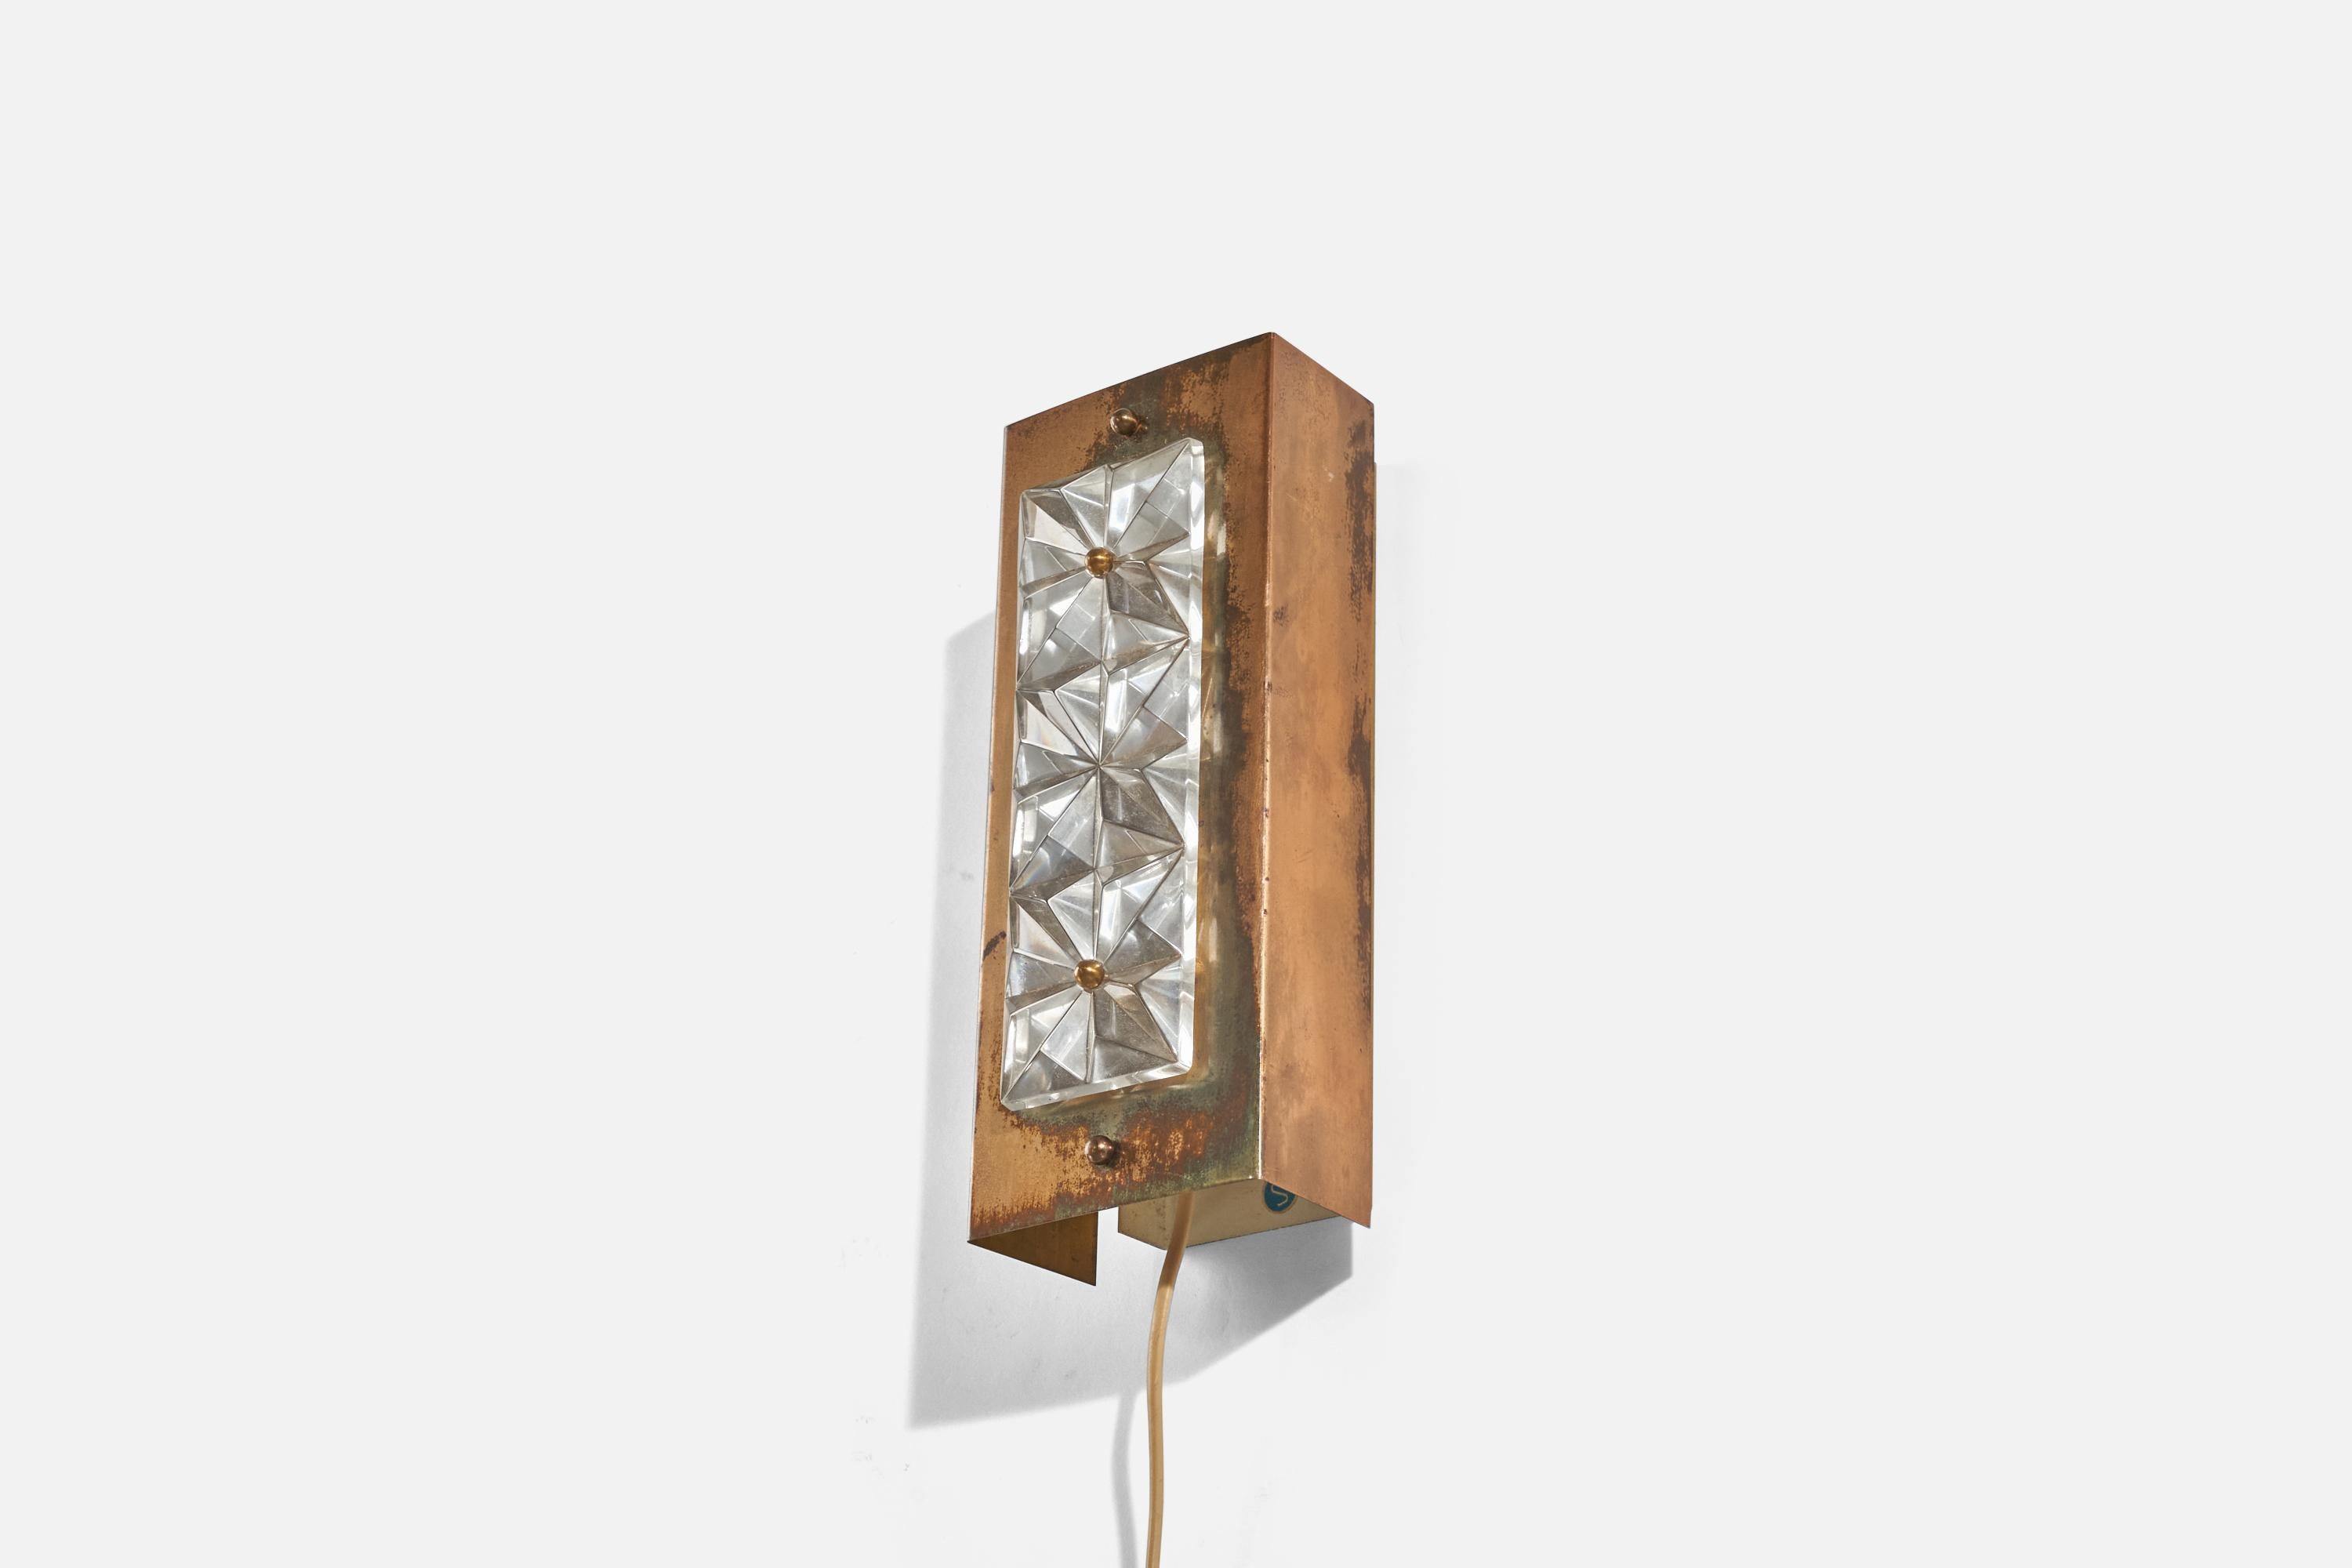 A copper, brass and glass sconce/ wall light designed and produced by Nils H. Ledung, Sweden, 1960s.

Dimensions of back plate (inches) : 8.68 x 2.78 x 0.84 (height x width x depth)

Socket takes E-14 bulb.

There is no maximum wattage stated